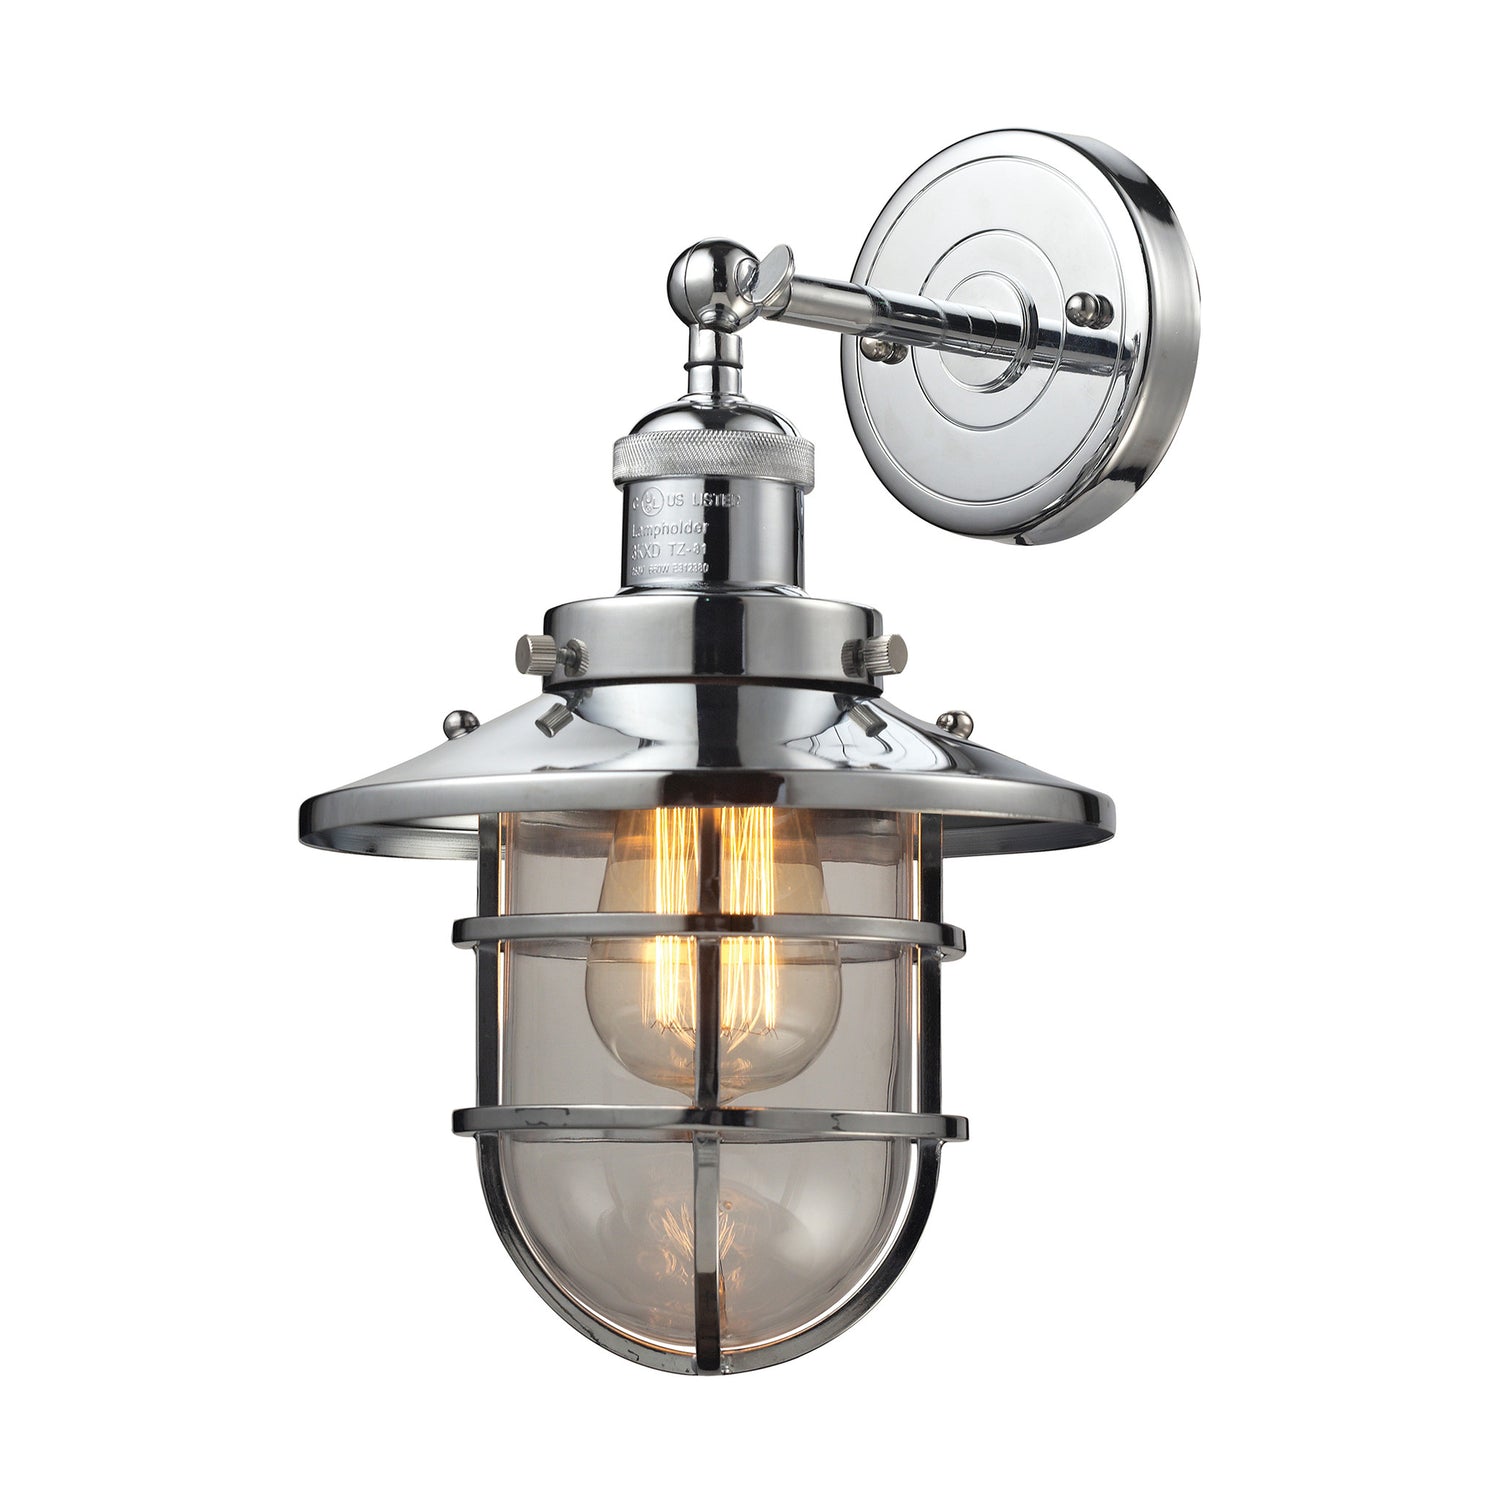 Seaport 1 Light Wall Sconce in Polished Chrome by Elk Lighting 66346-1